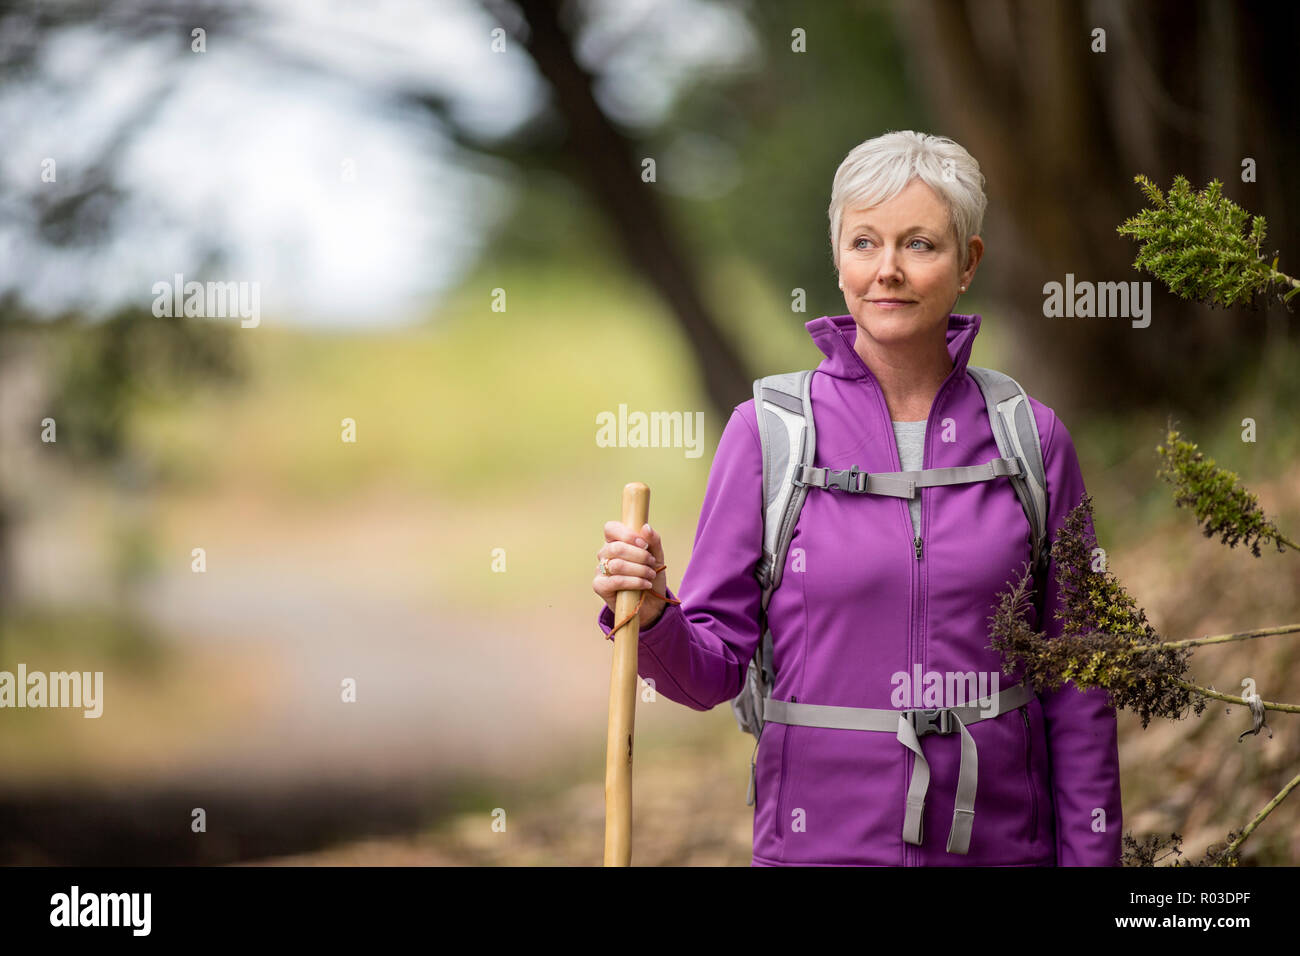 Portrait of a mature woman enjoying a peaceful hike along a forest trail. Stock Photo